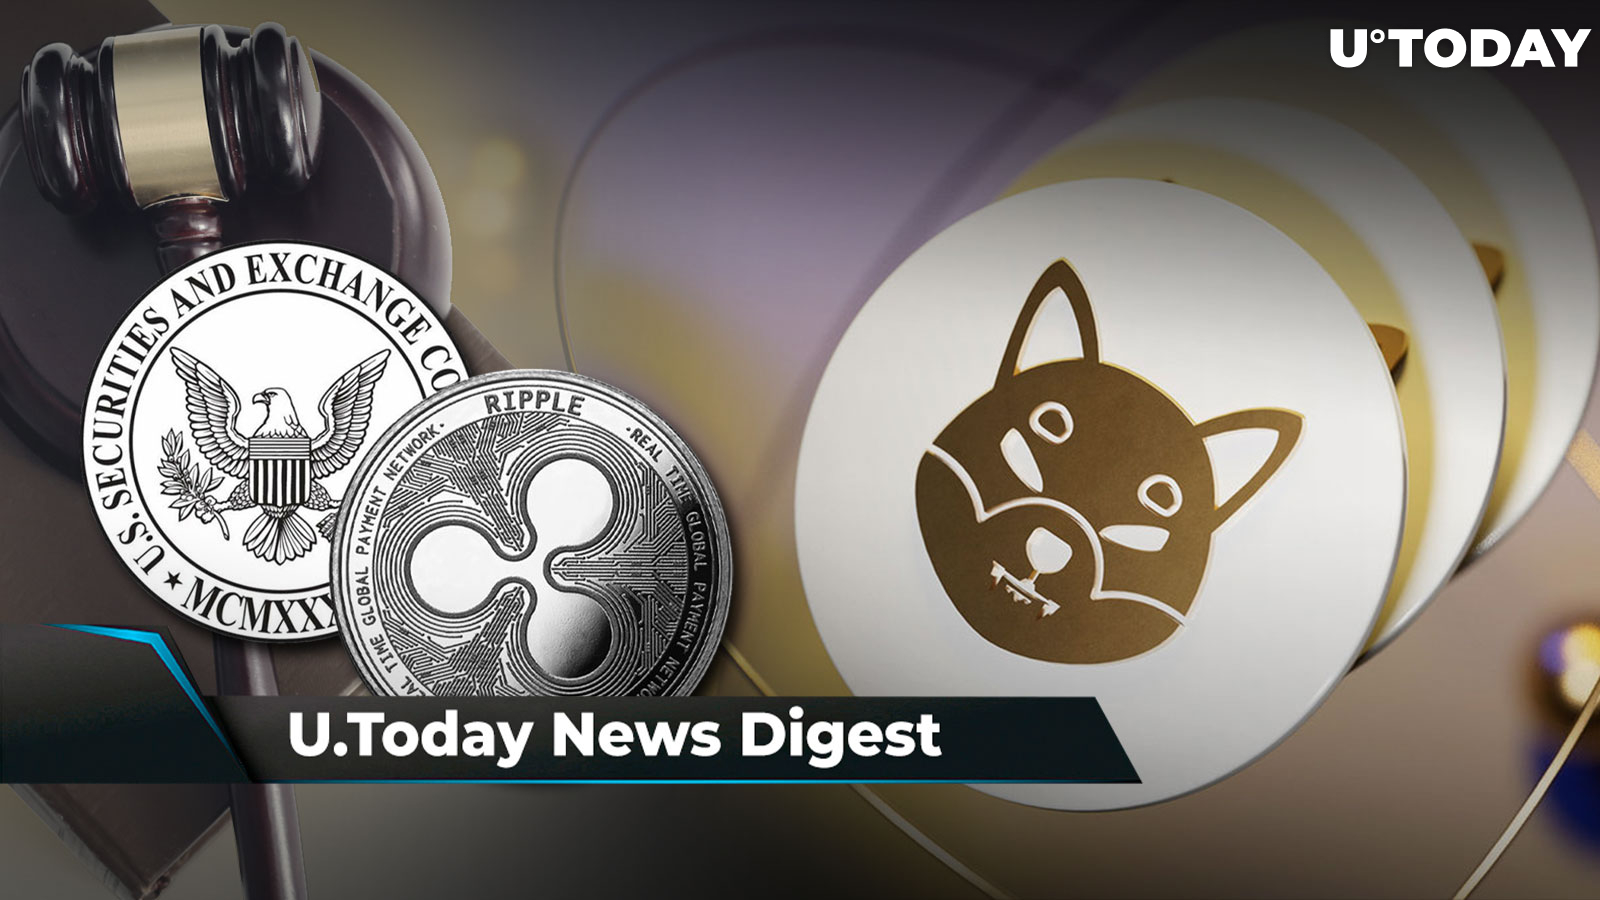 SHIB’s New Era Has Begun, Crypto Executive Says Ripple Will Lose Against SEC, LEASH and PAW Achieve New Listing: Crypto News Digest by U.Today